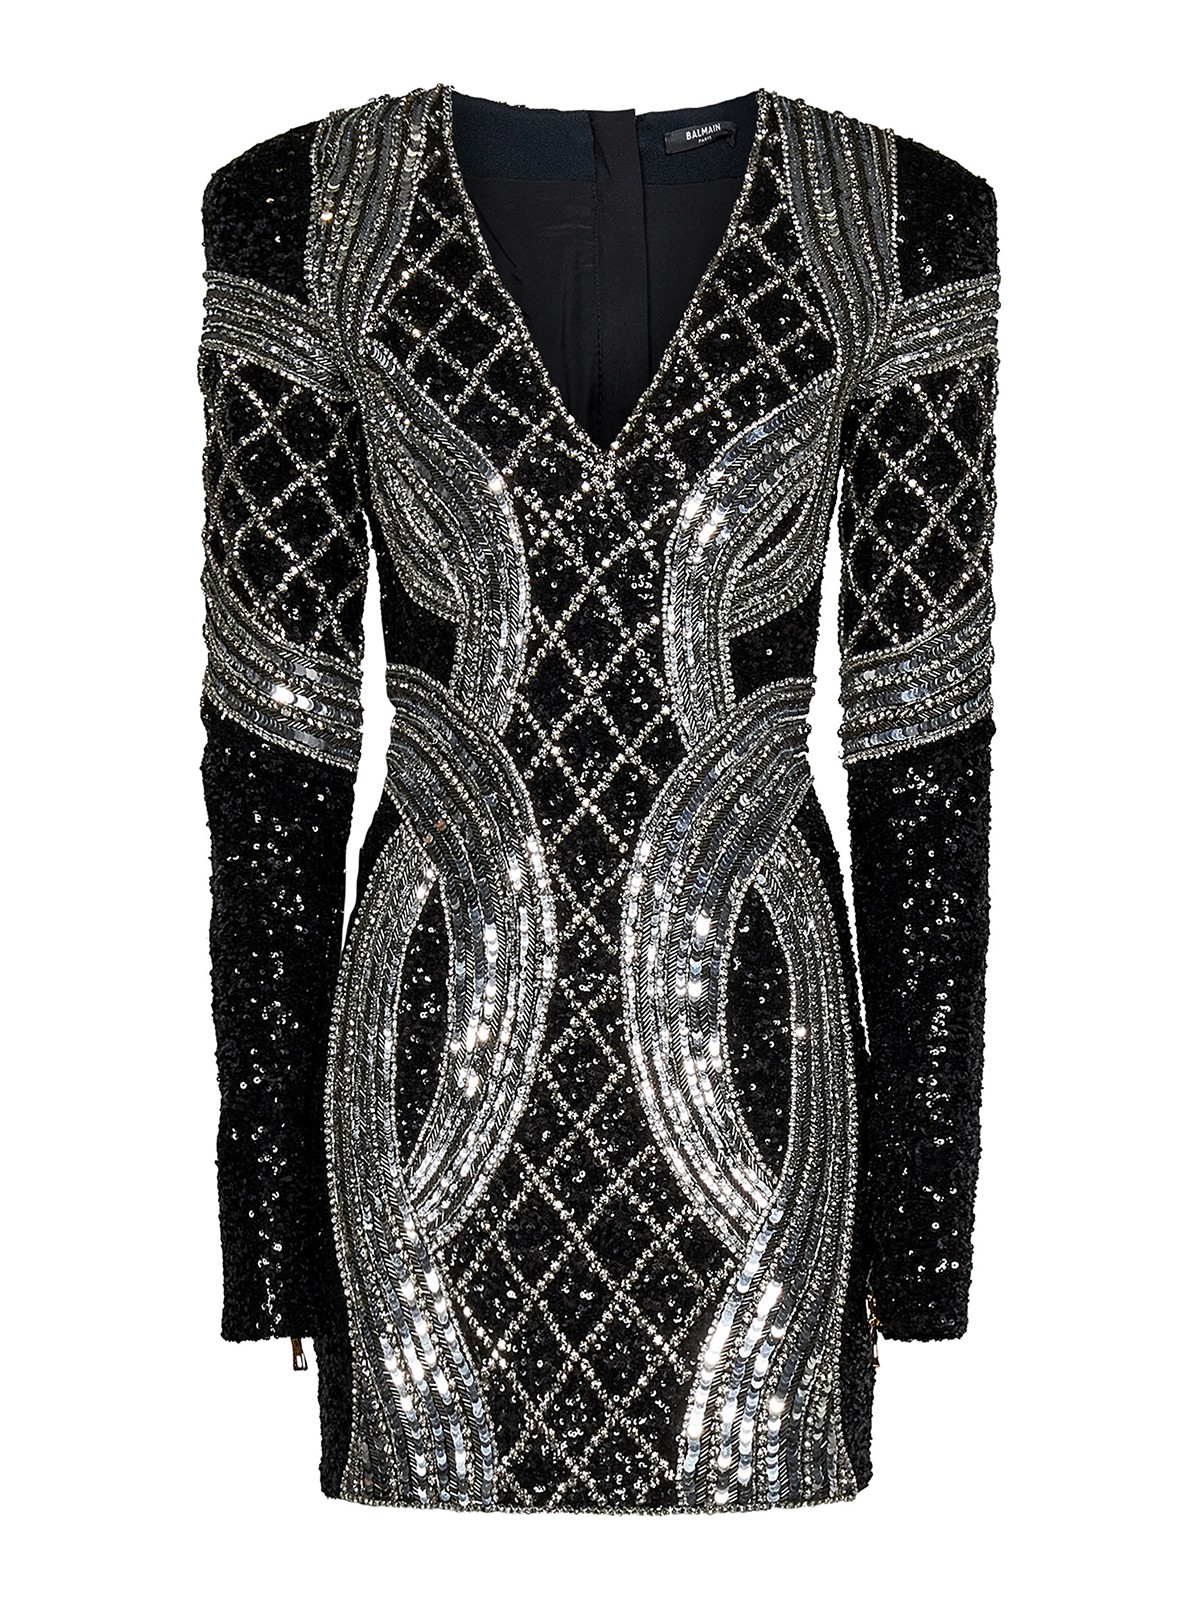 BALMAIN SEQUINS AND CRYSTALS EMBROIDERED MINIDRESS